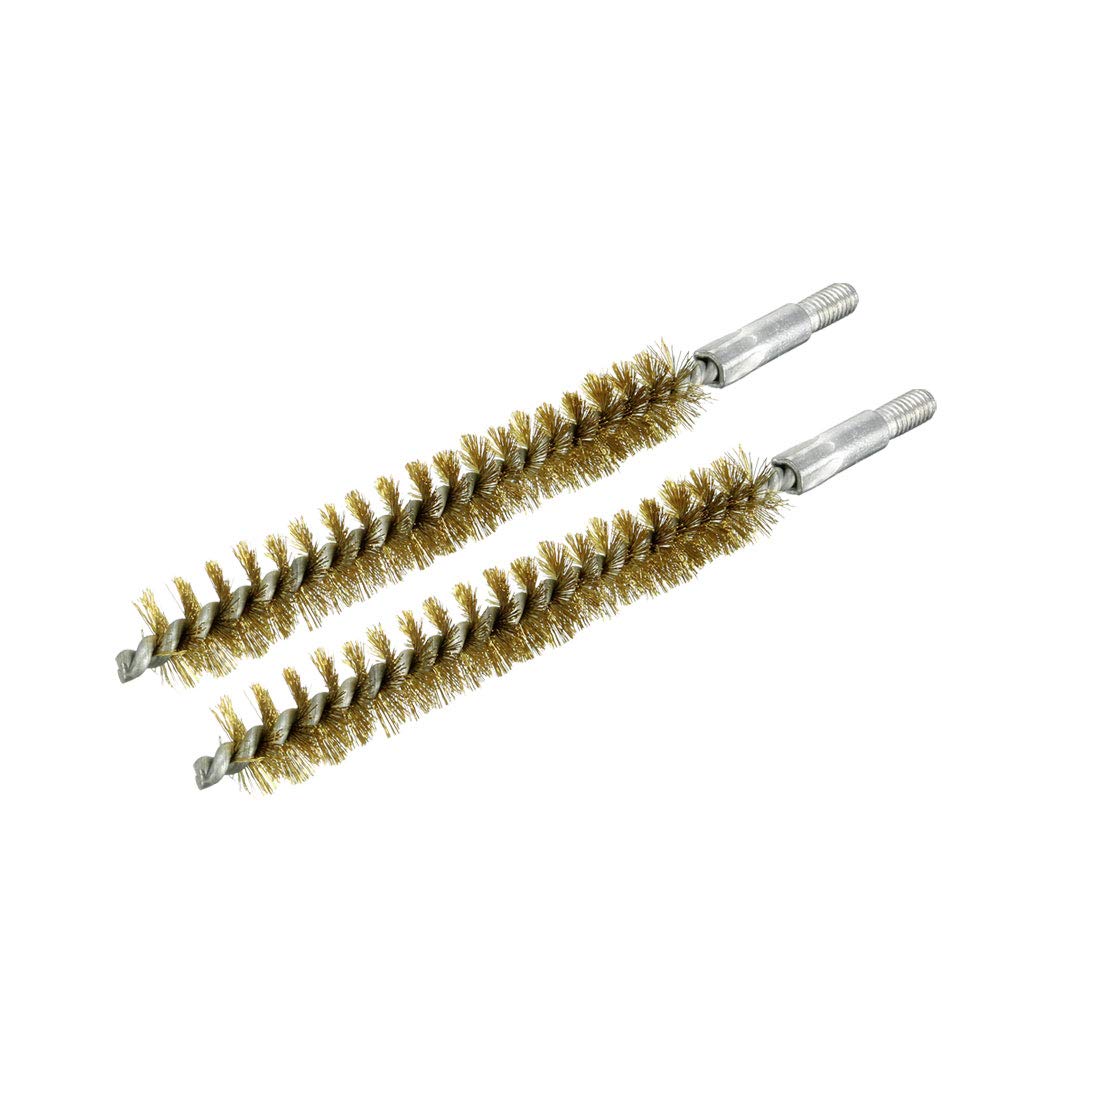 how to clean my coils with a wire brush